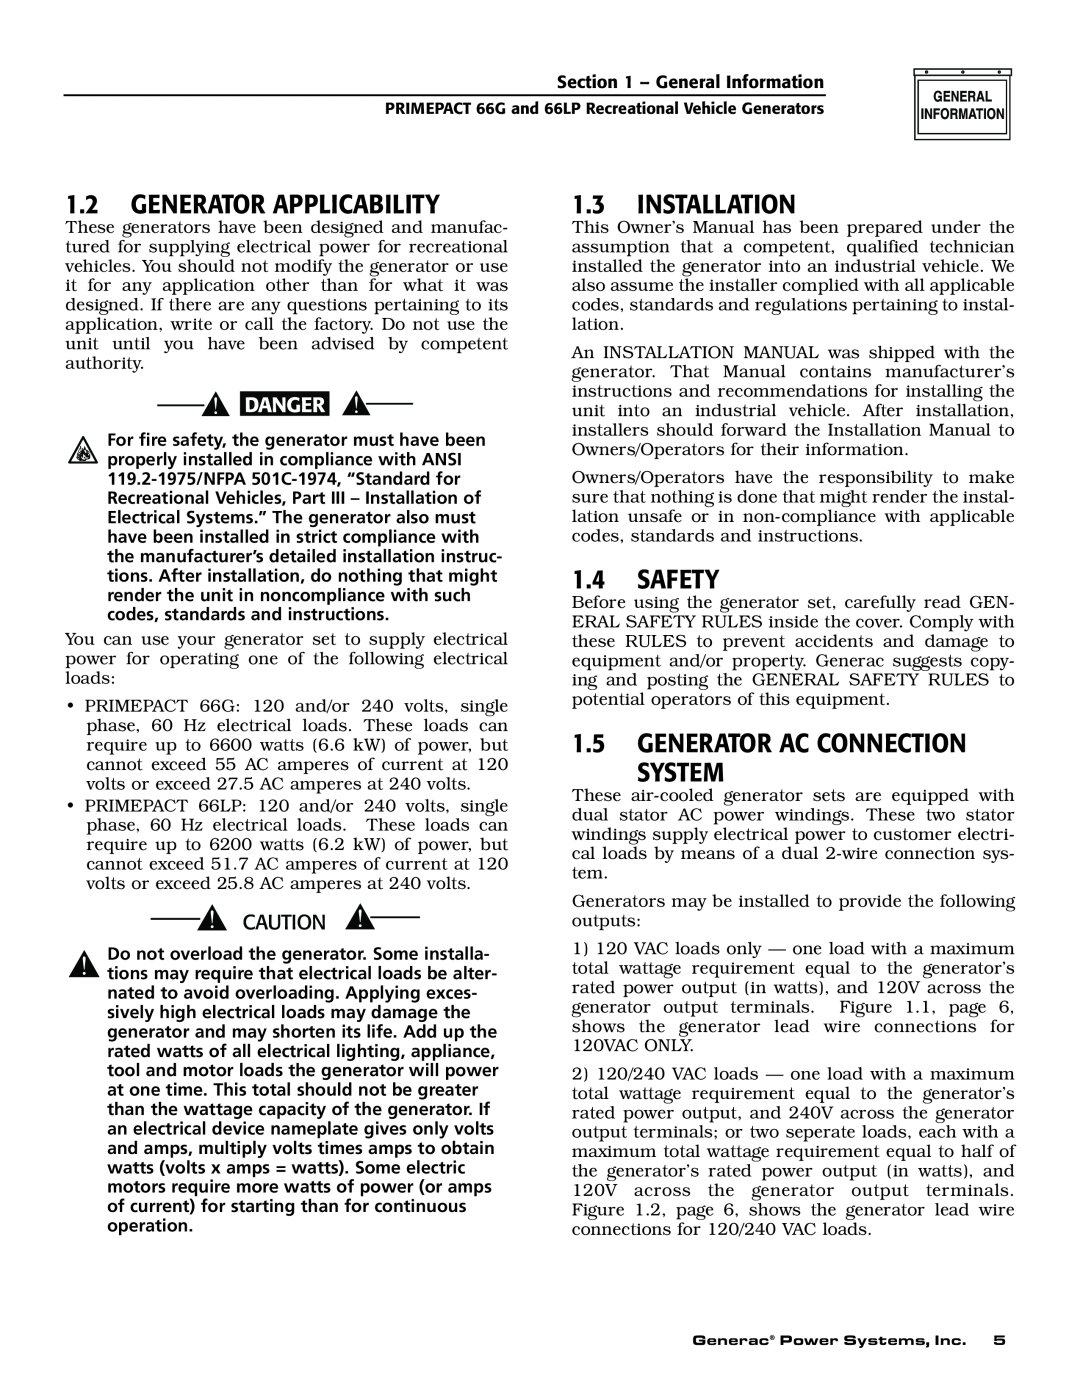 Generac Power Systems 009600-5, 009734-5 owner manual 1.2GENERATOR APPLICABILITY, 1.3INSTALLATION, 1.4SAFETY 